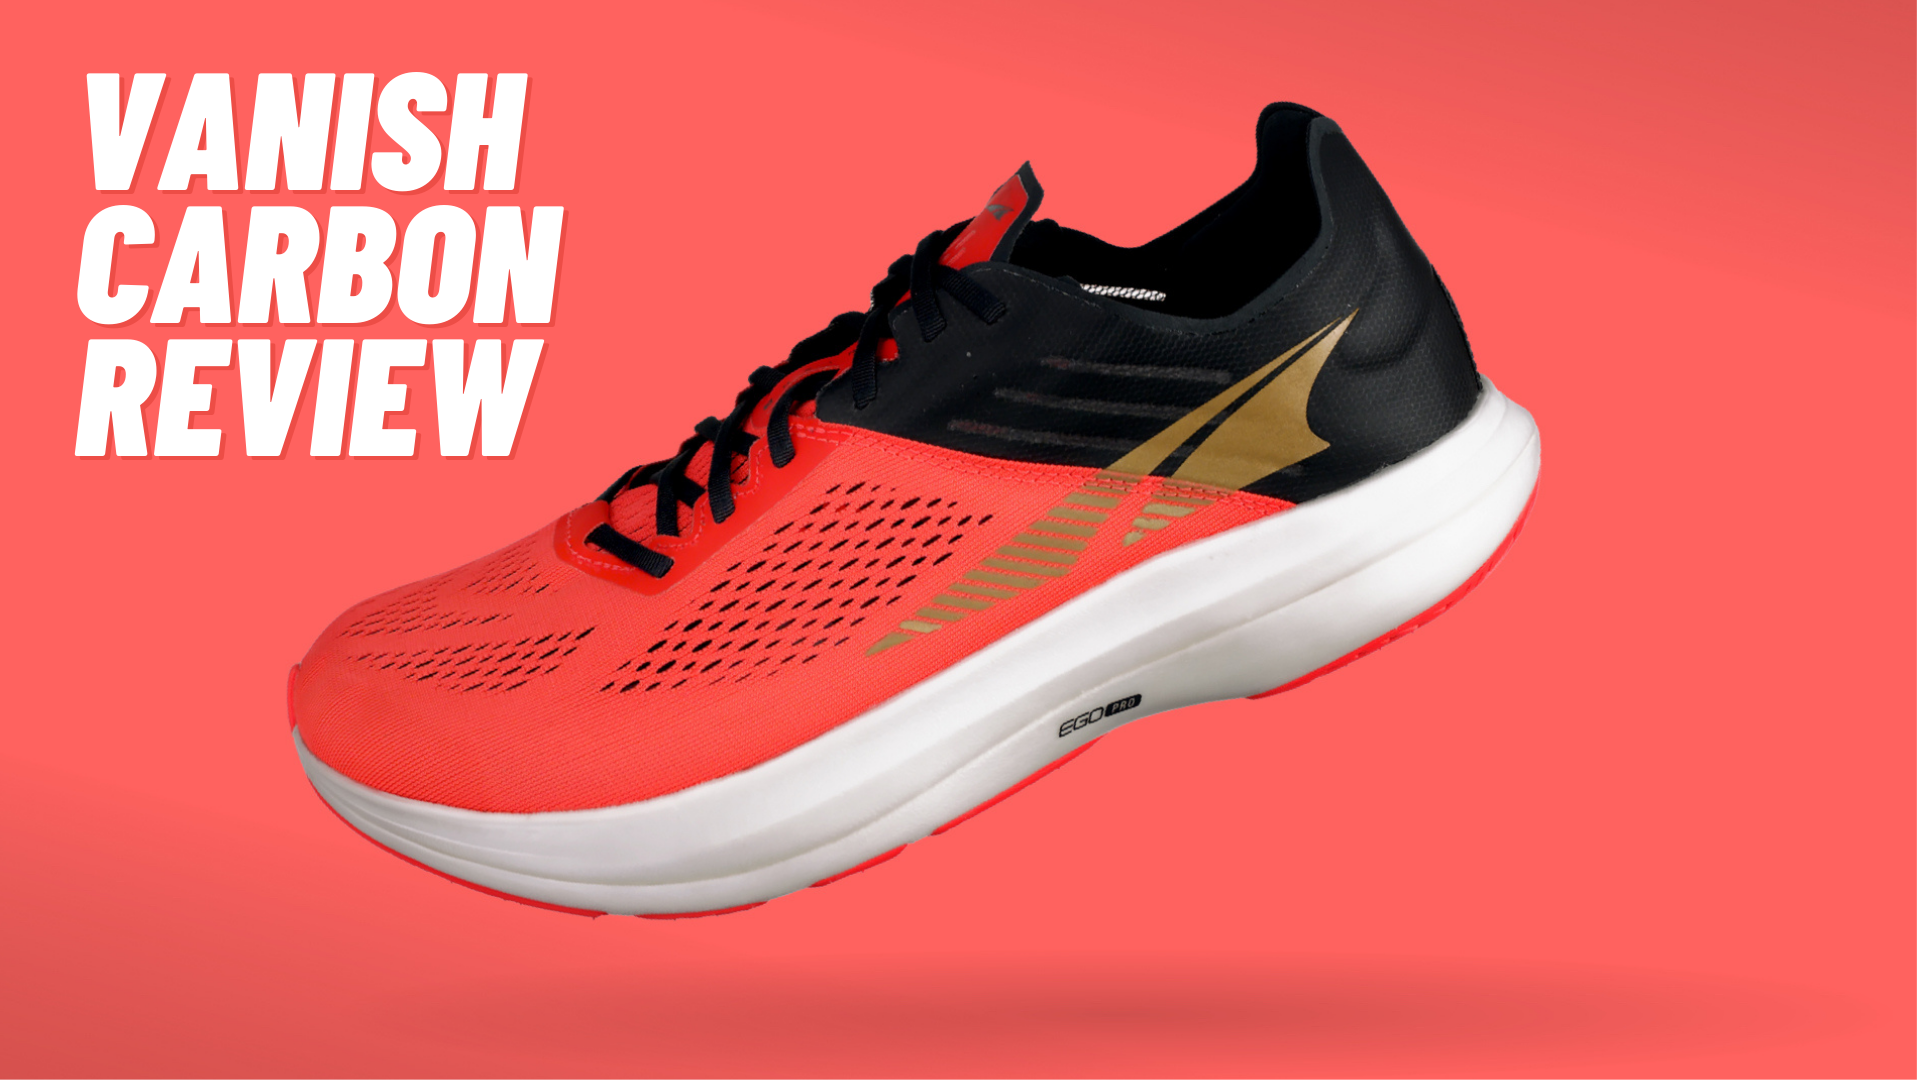 Running Lab - Altra Vanish Carbon Product Review - Running Lab